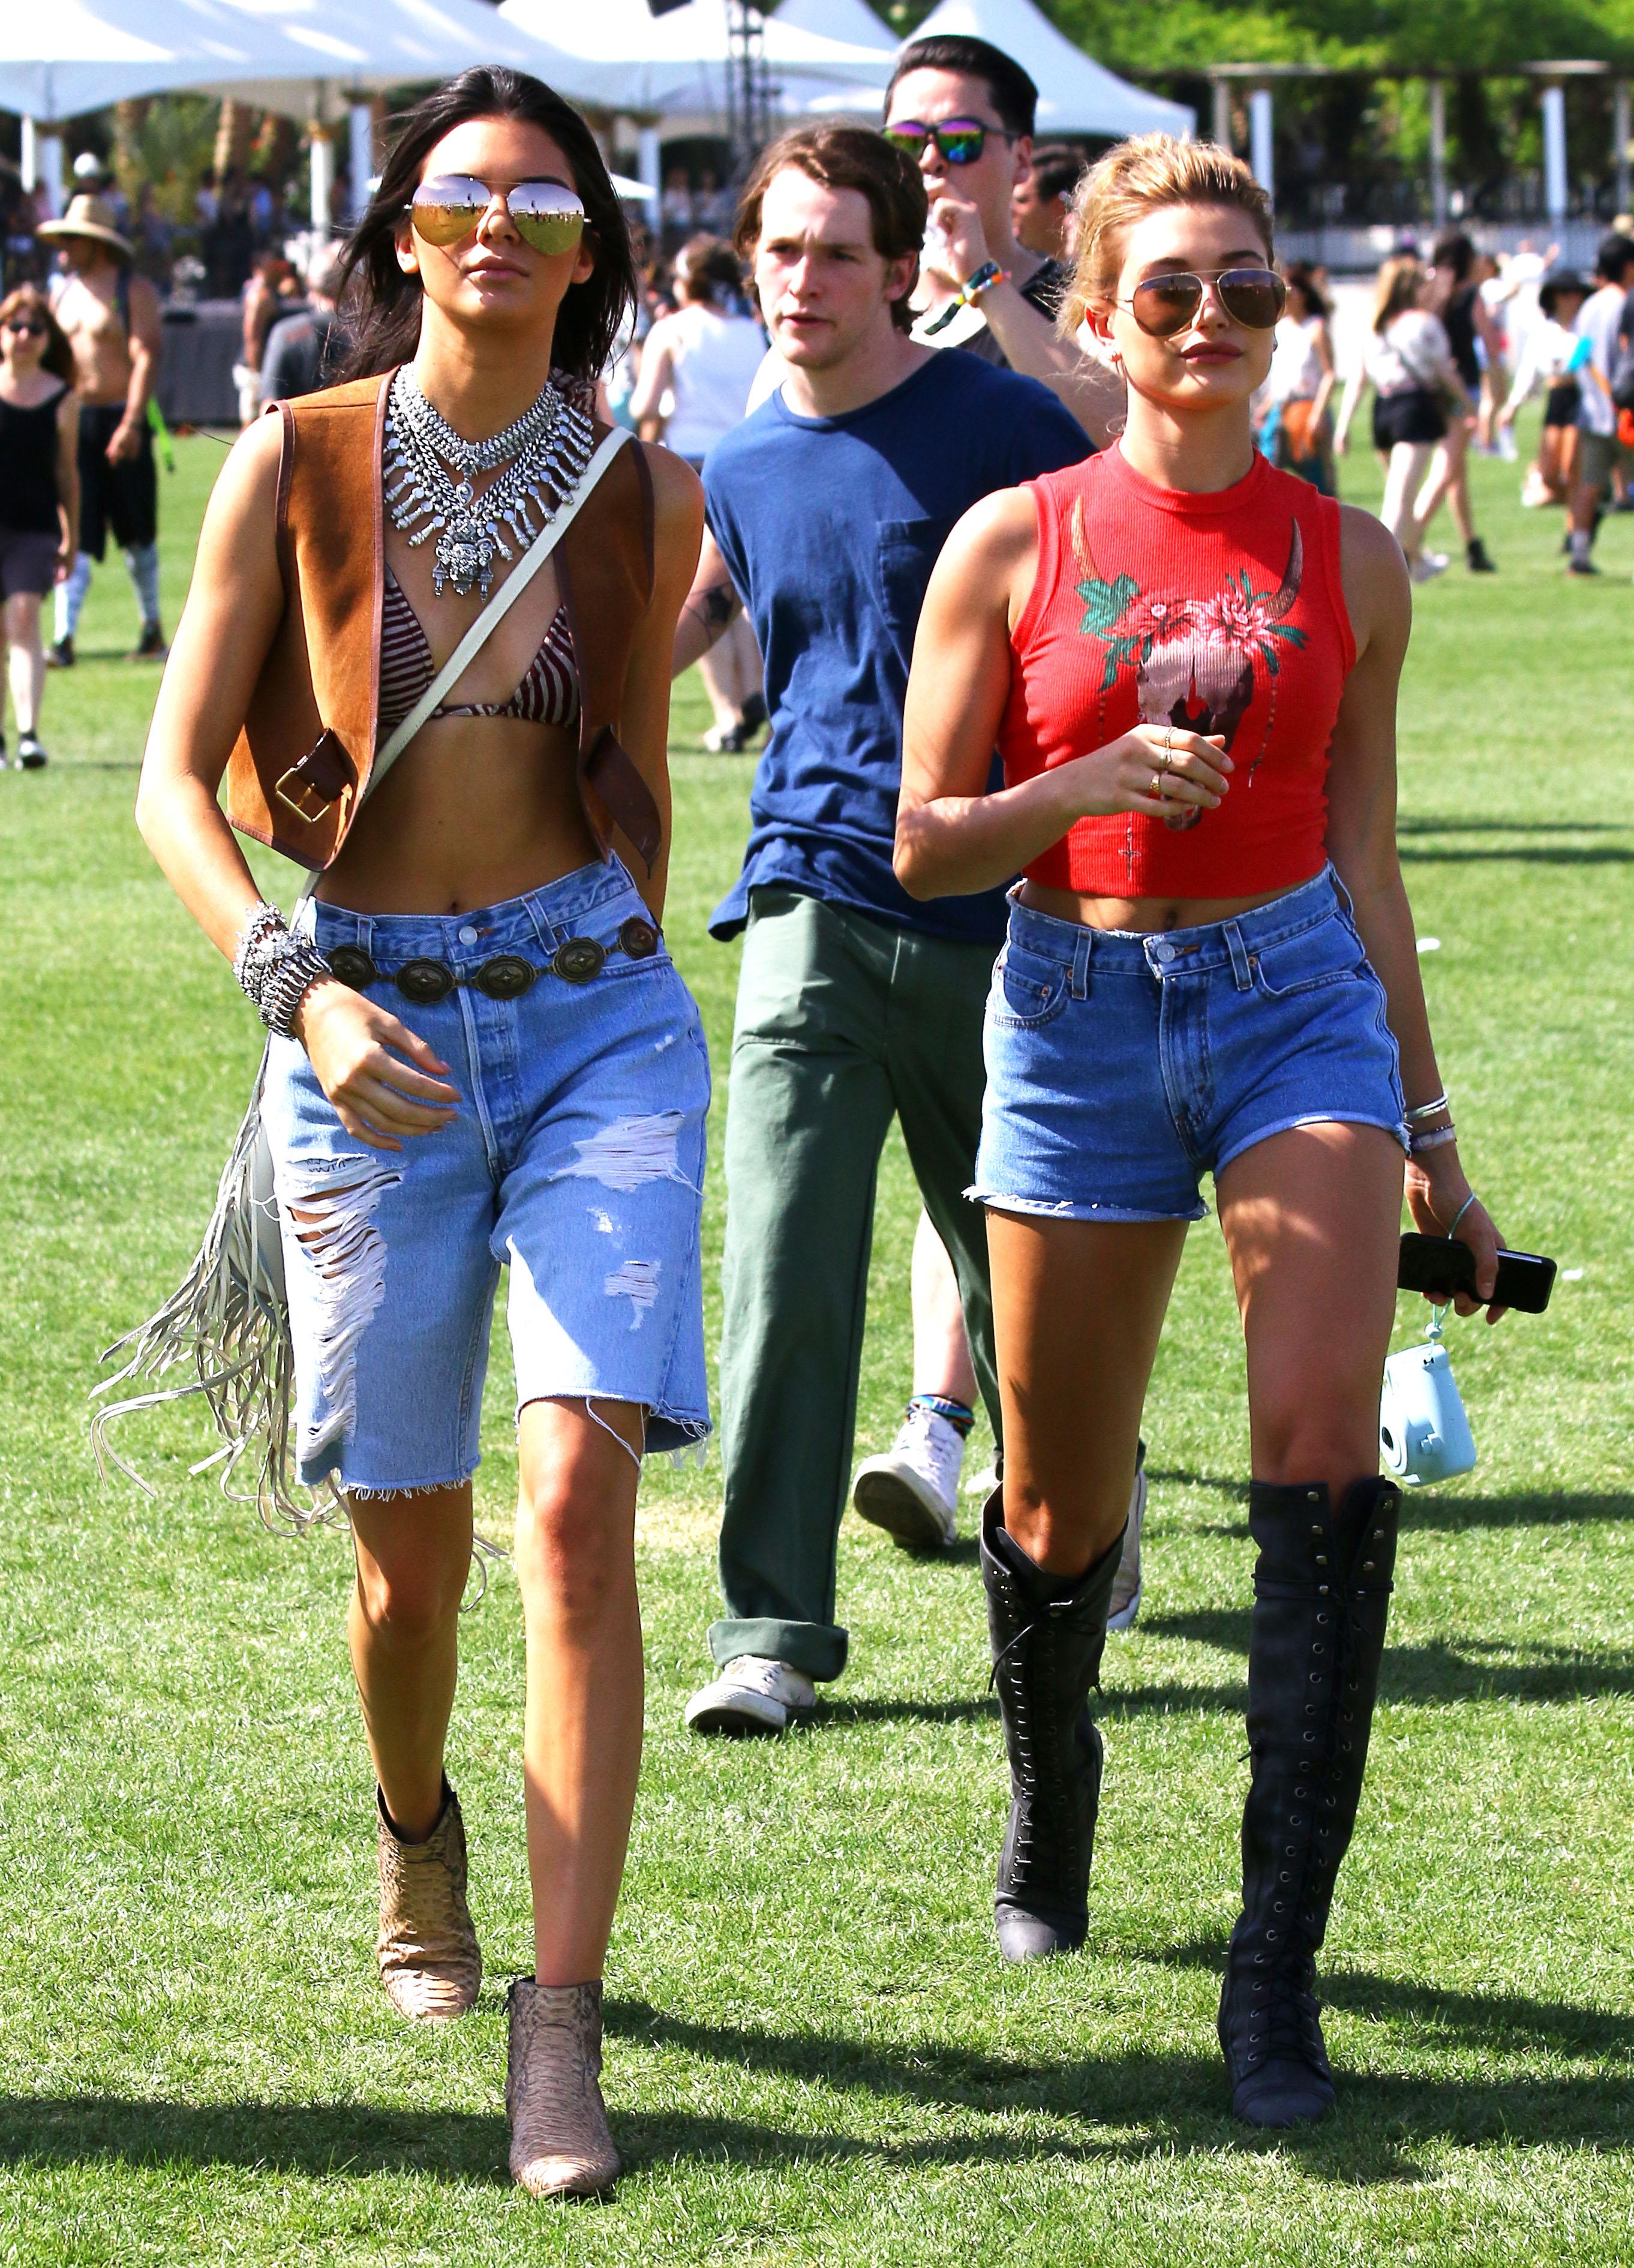 Festival Fashion! Kendall And Kylie Jenner Lead The Pack At Coachella